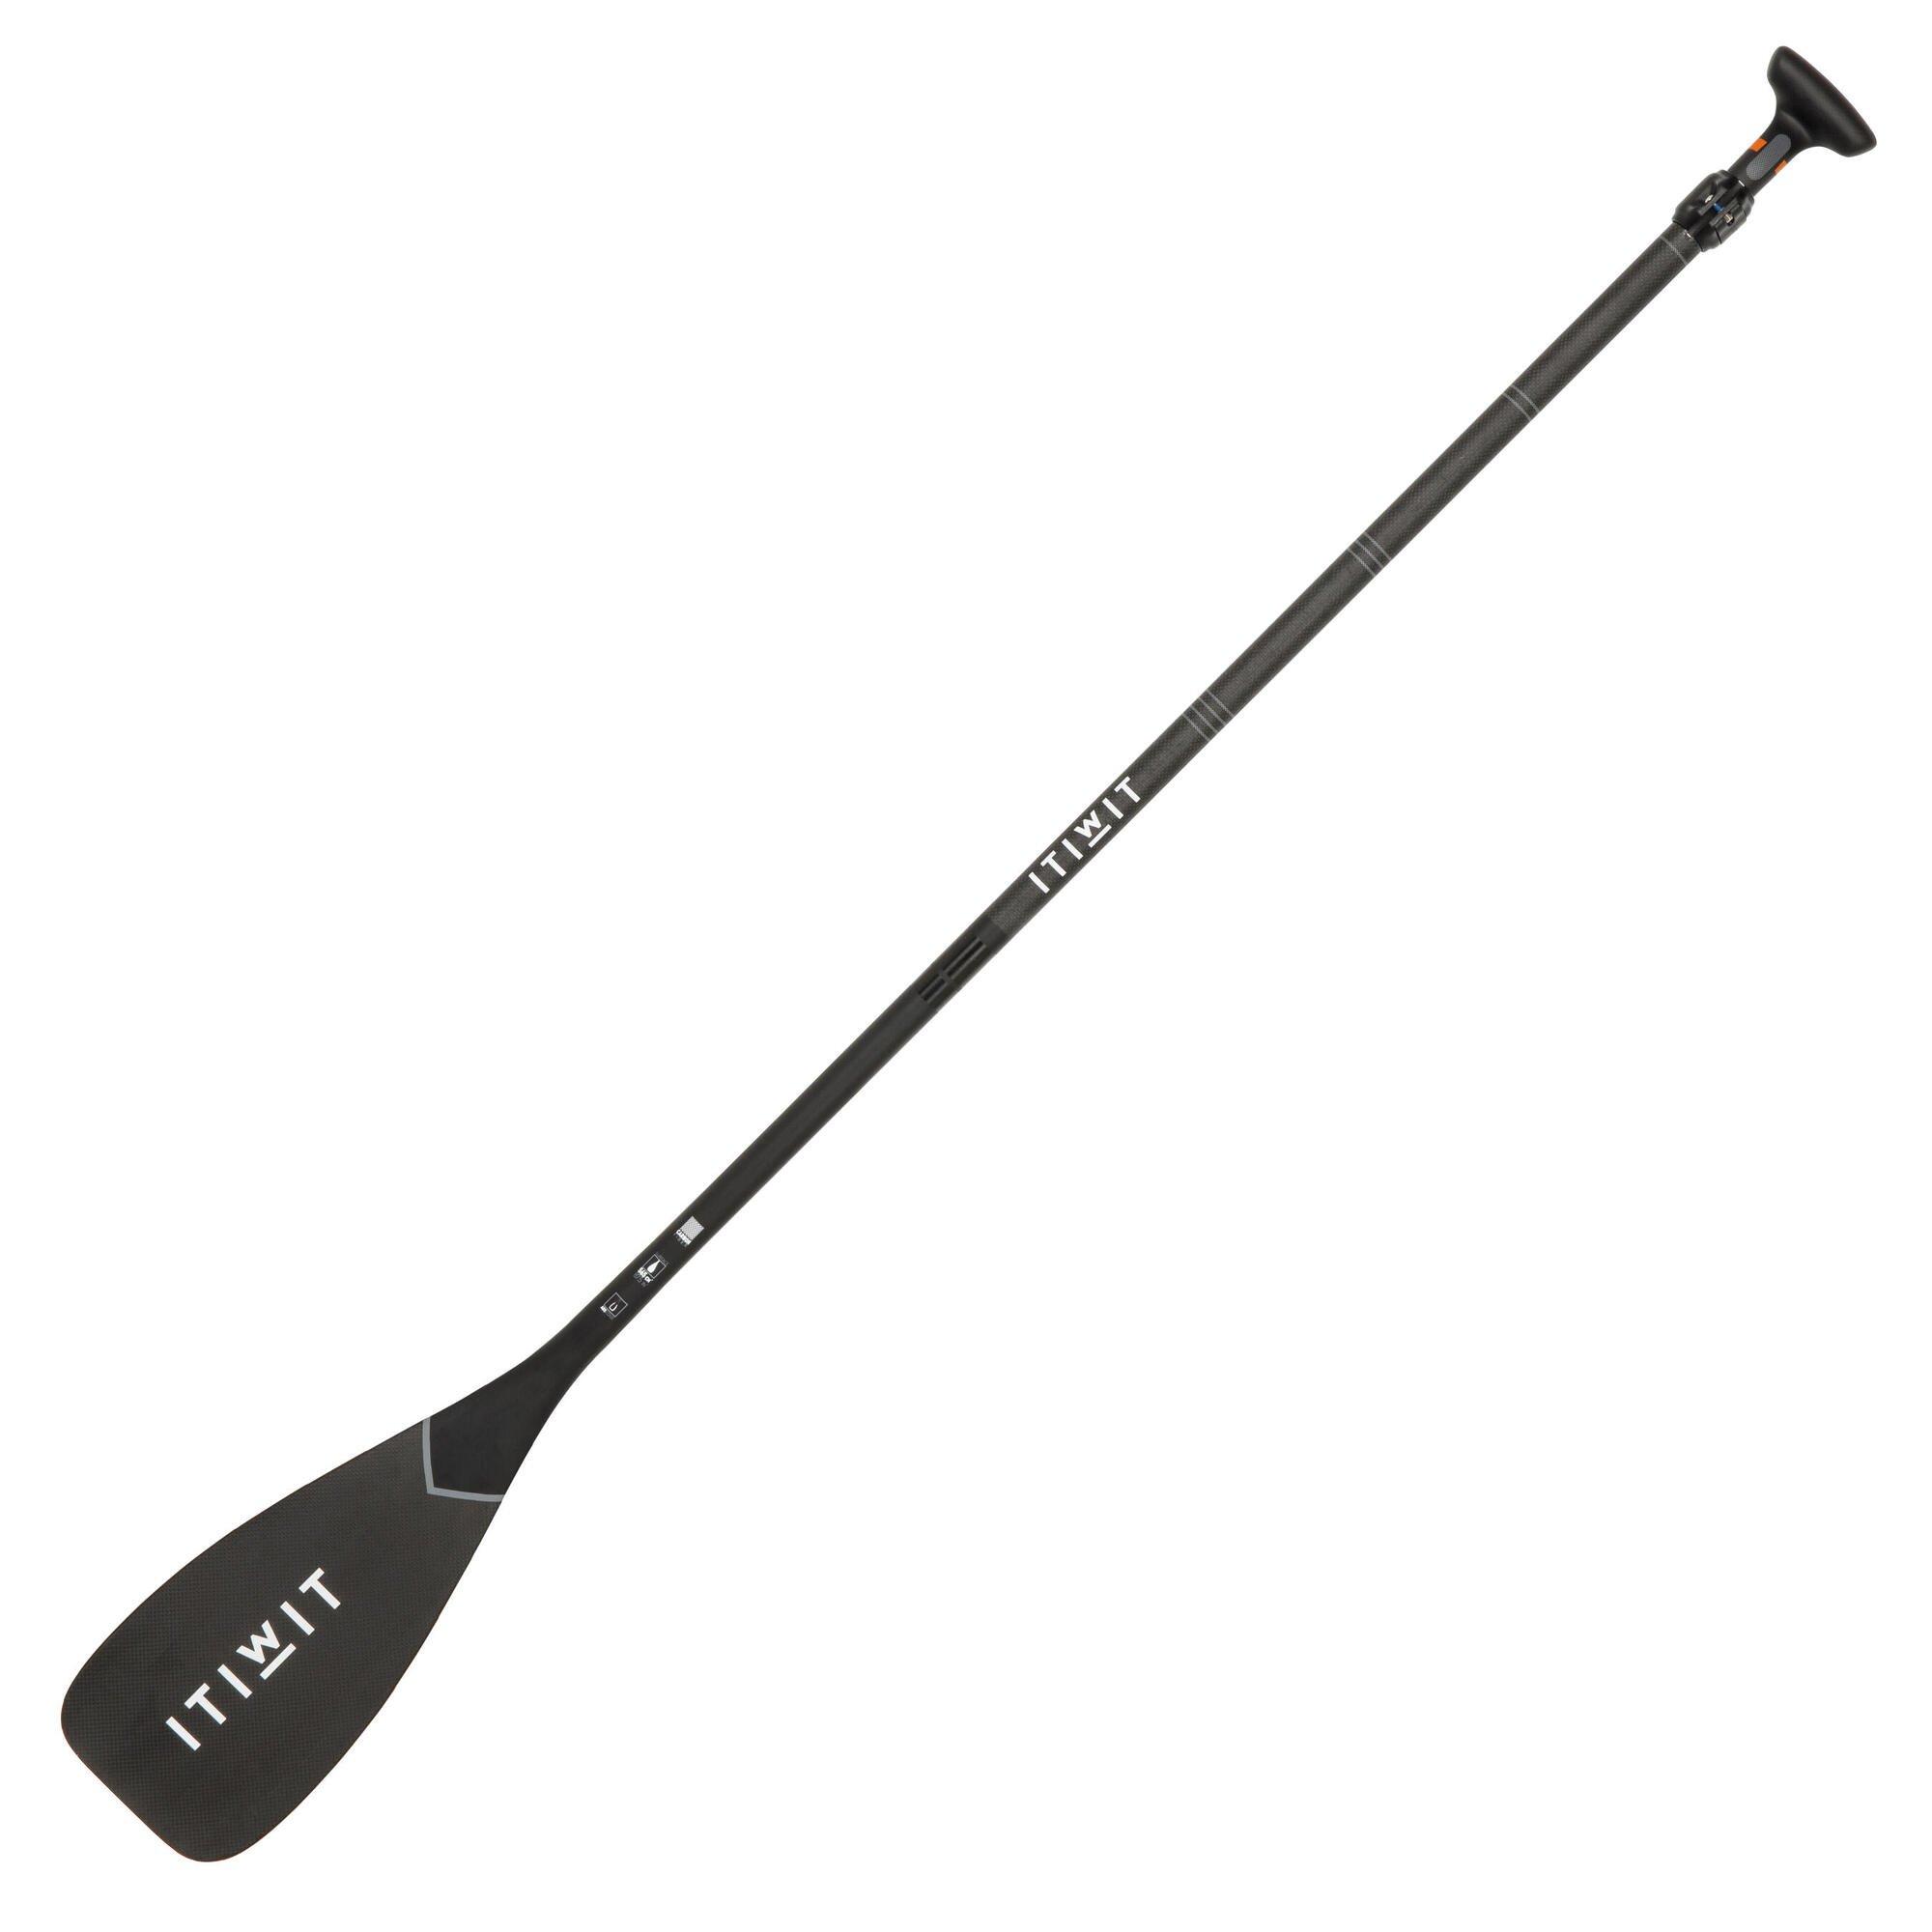 Decathlon Sd Up Paddle 2-Part Adjustable Carbon Paddle